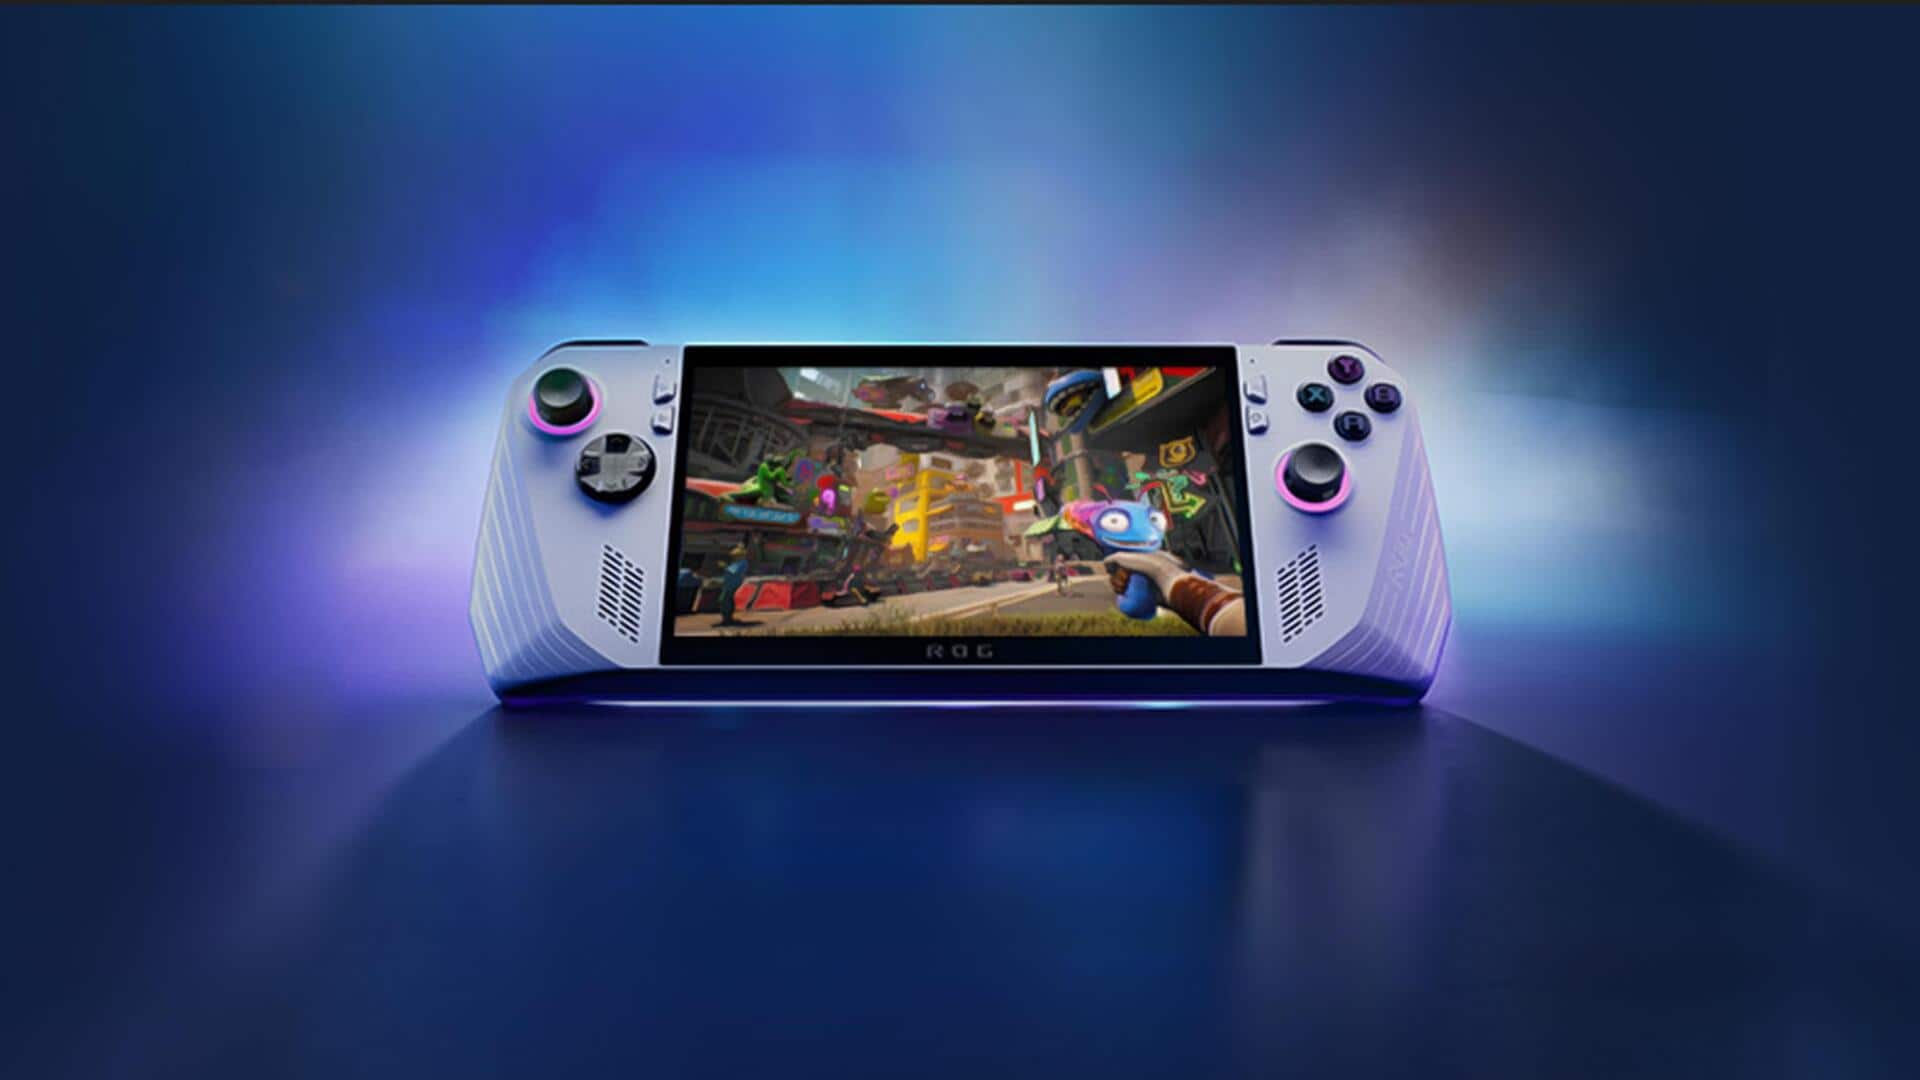 ASUS launches Windows 11-based handheld gaming console at Rs. 70,000